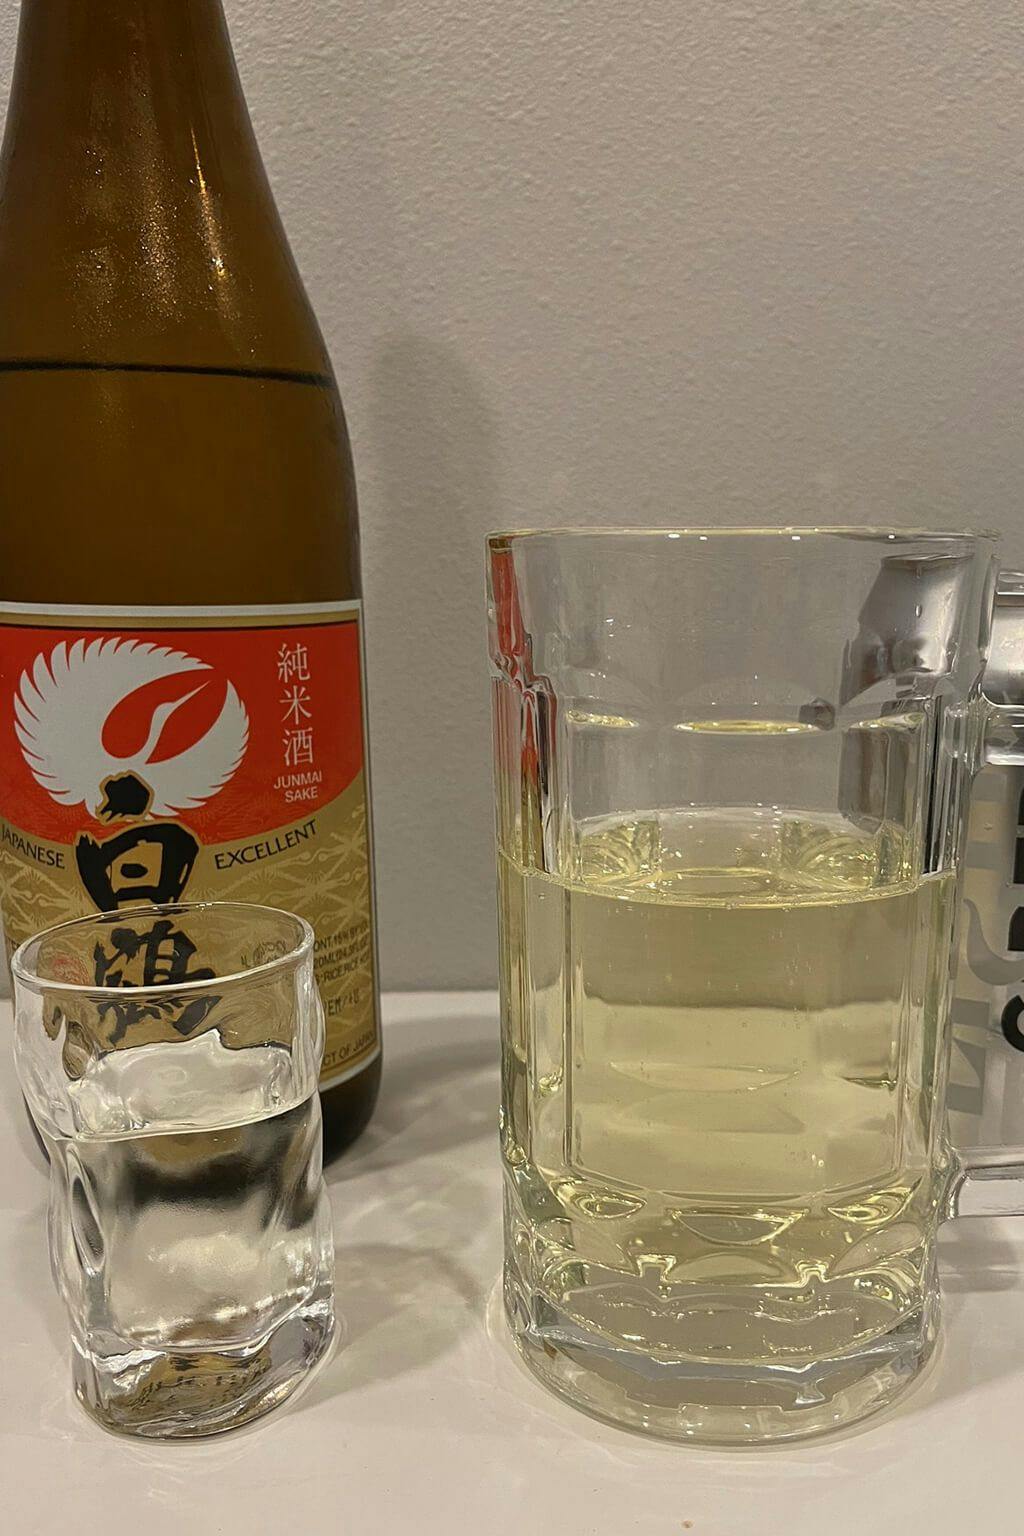 Sake bomb with junmai and cider